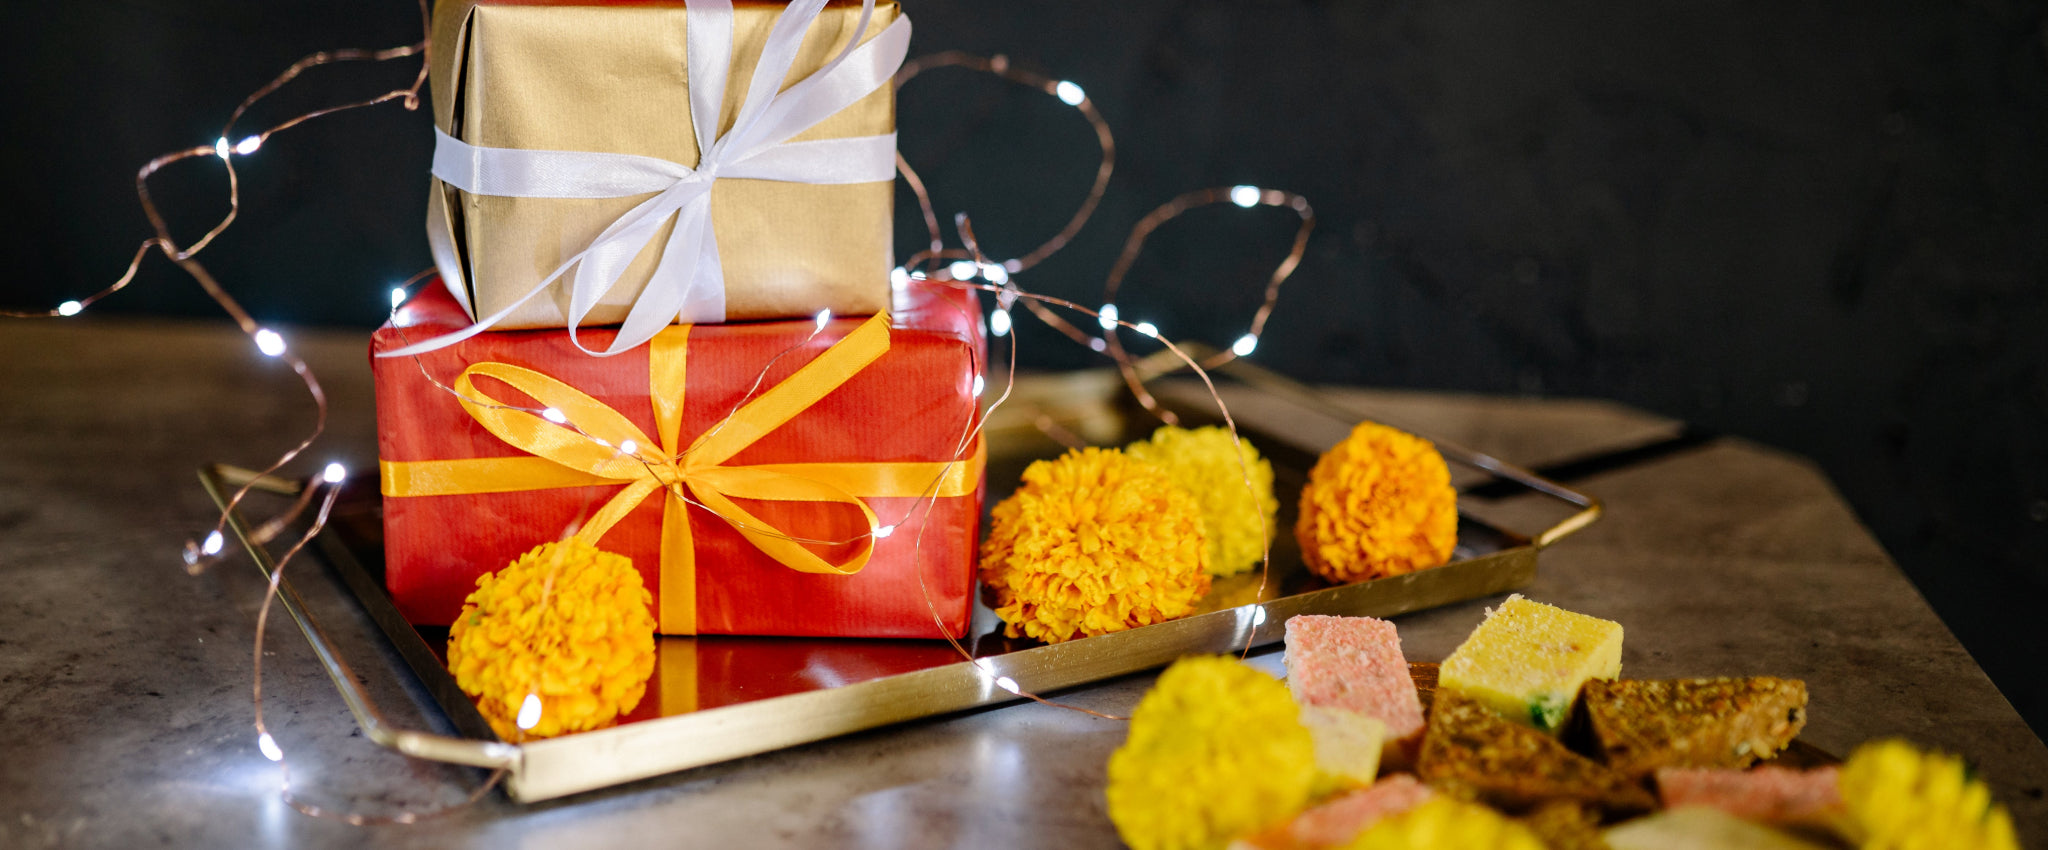 Unique Corporate Diwali Gift Ideas for Employees